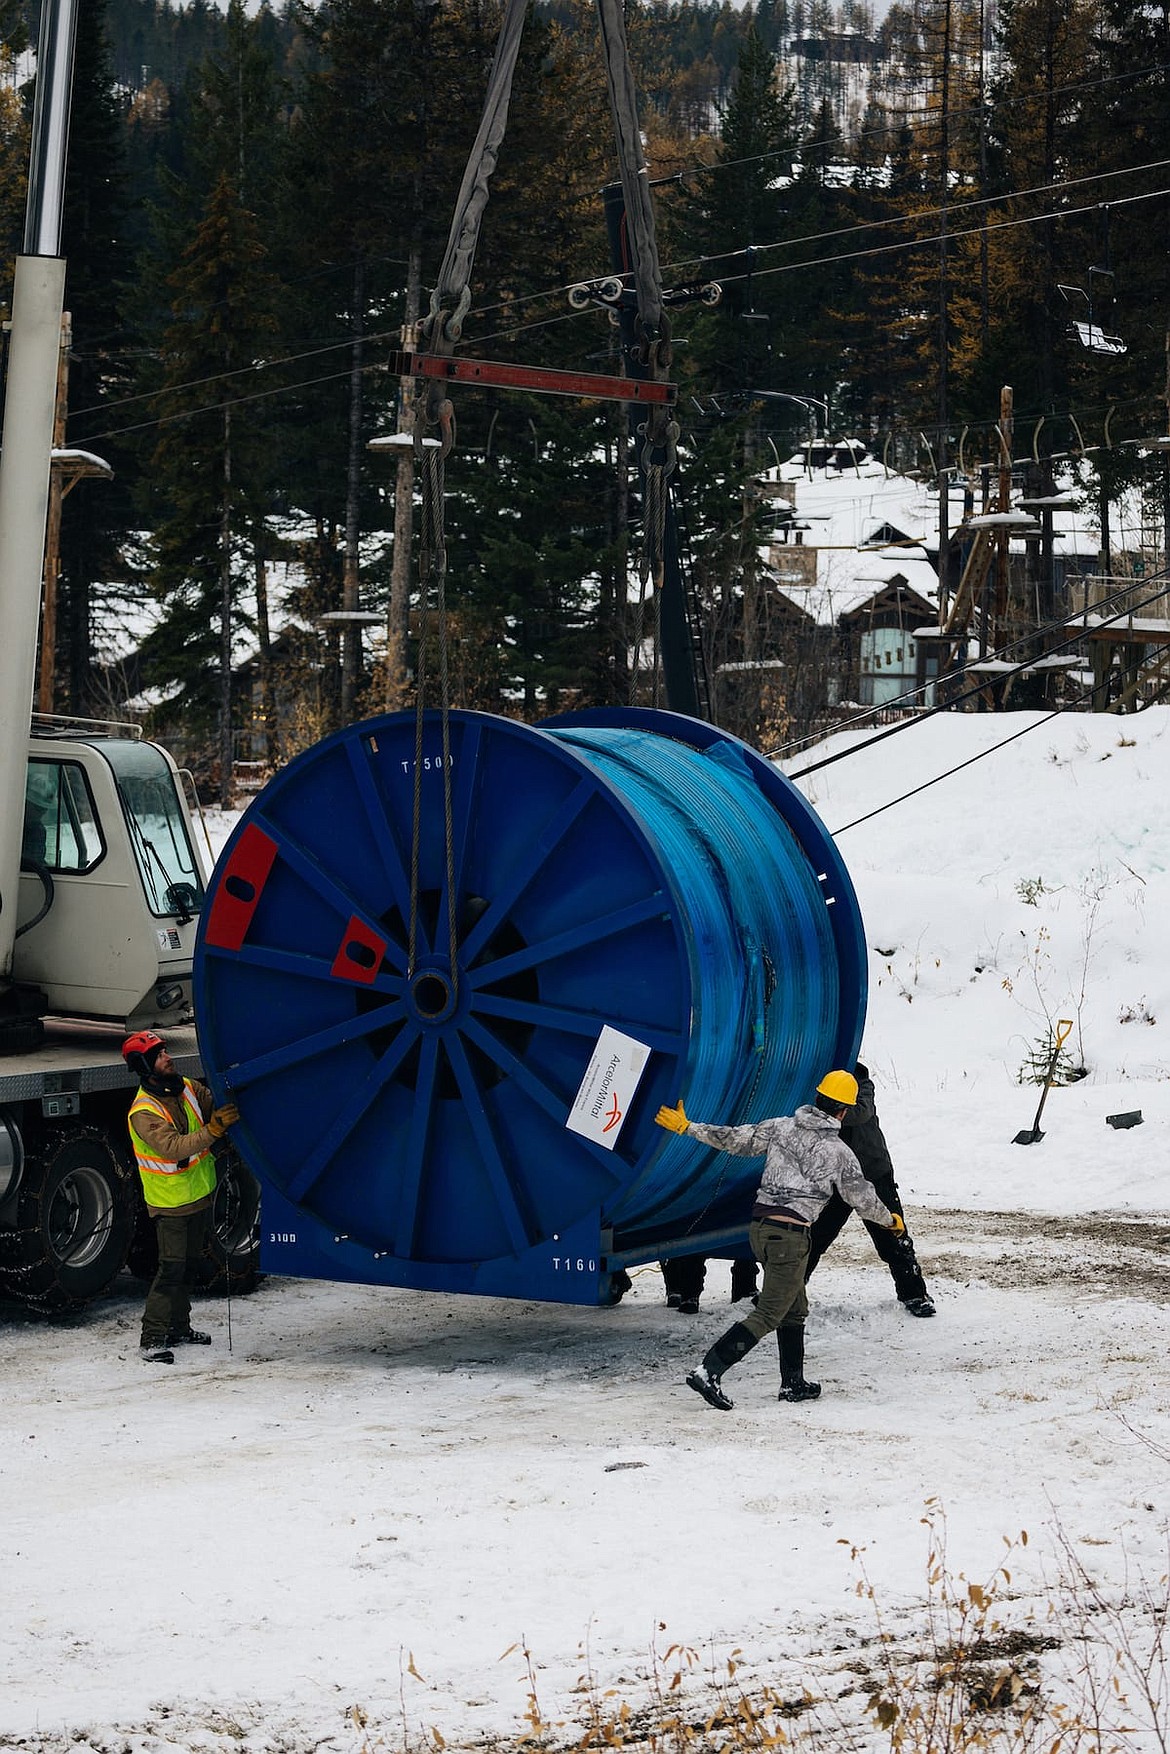 The haul rope for the new Chair 4 finally arrived at Whitefish Mountain Resort last week. (Photo courtesy of Whitefish Mountain Resort)